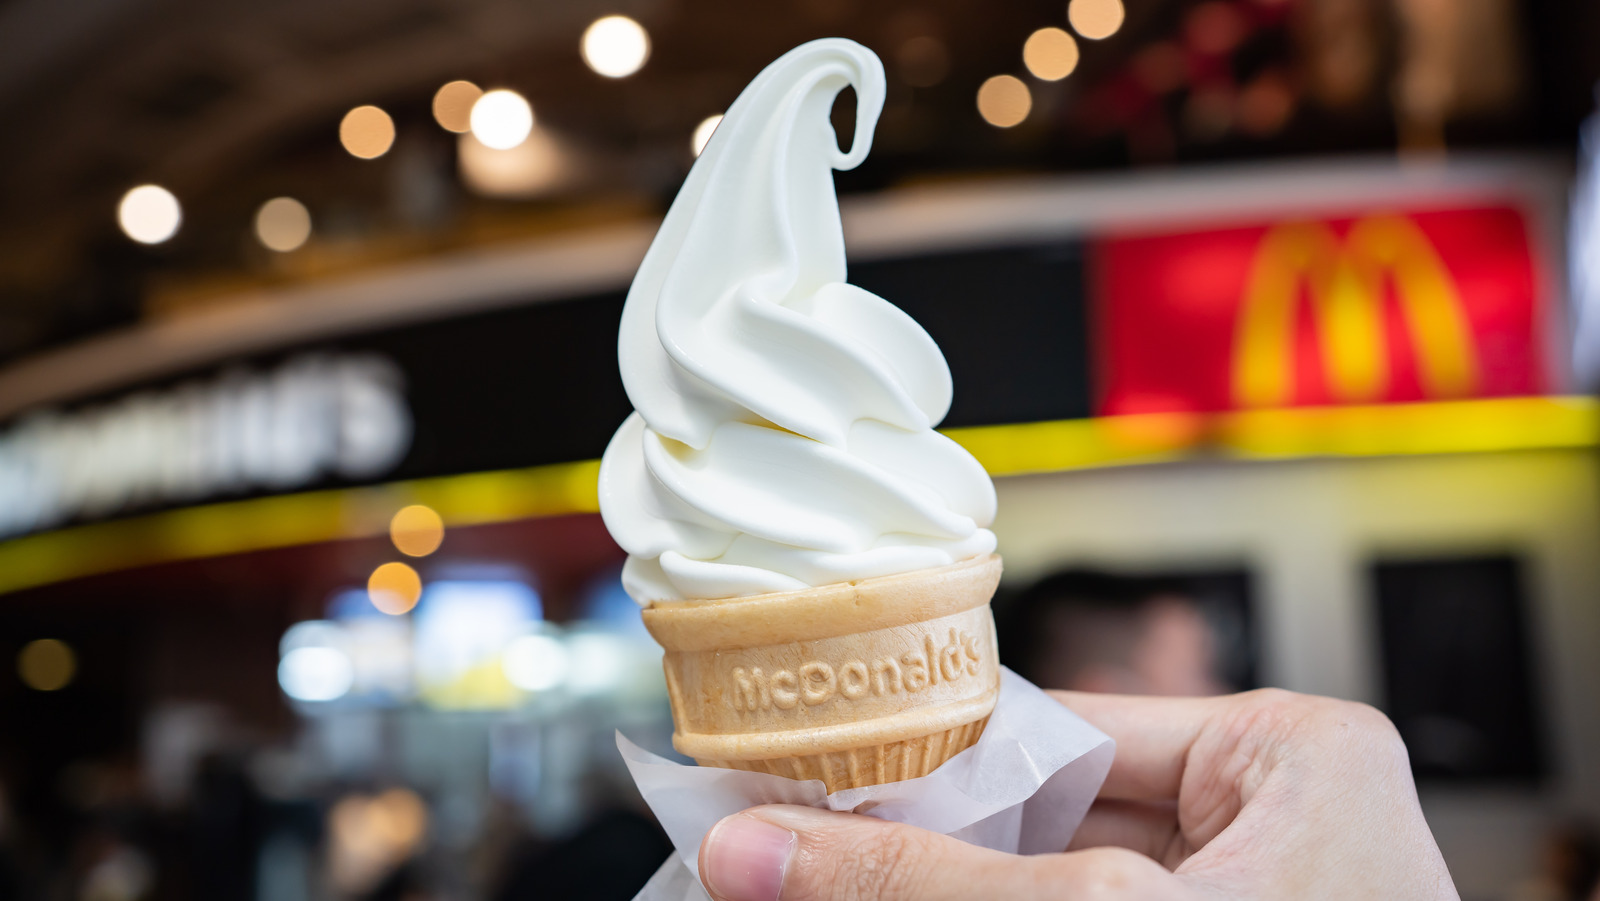 https://www.thedailymeal.com/img/gallery/ranking-12-fast-food-soft-serve-ice-creams-from-worst-to-best/l-intro-1678144555.jpg